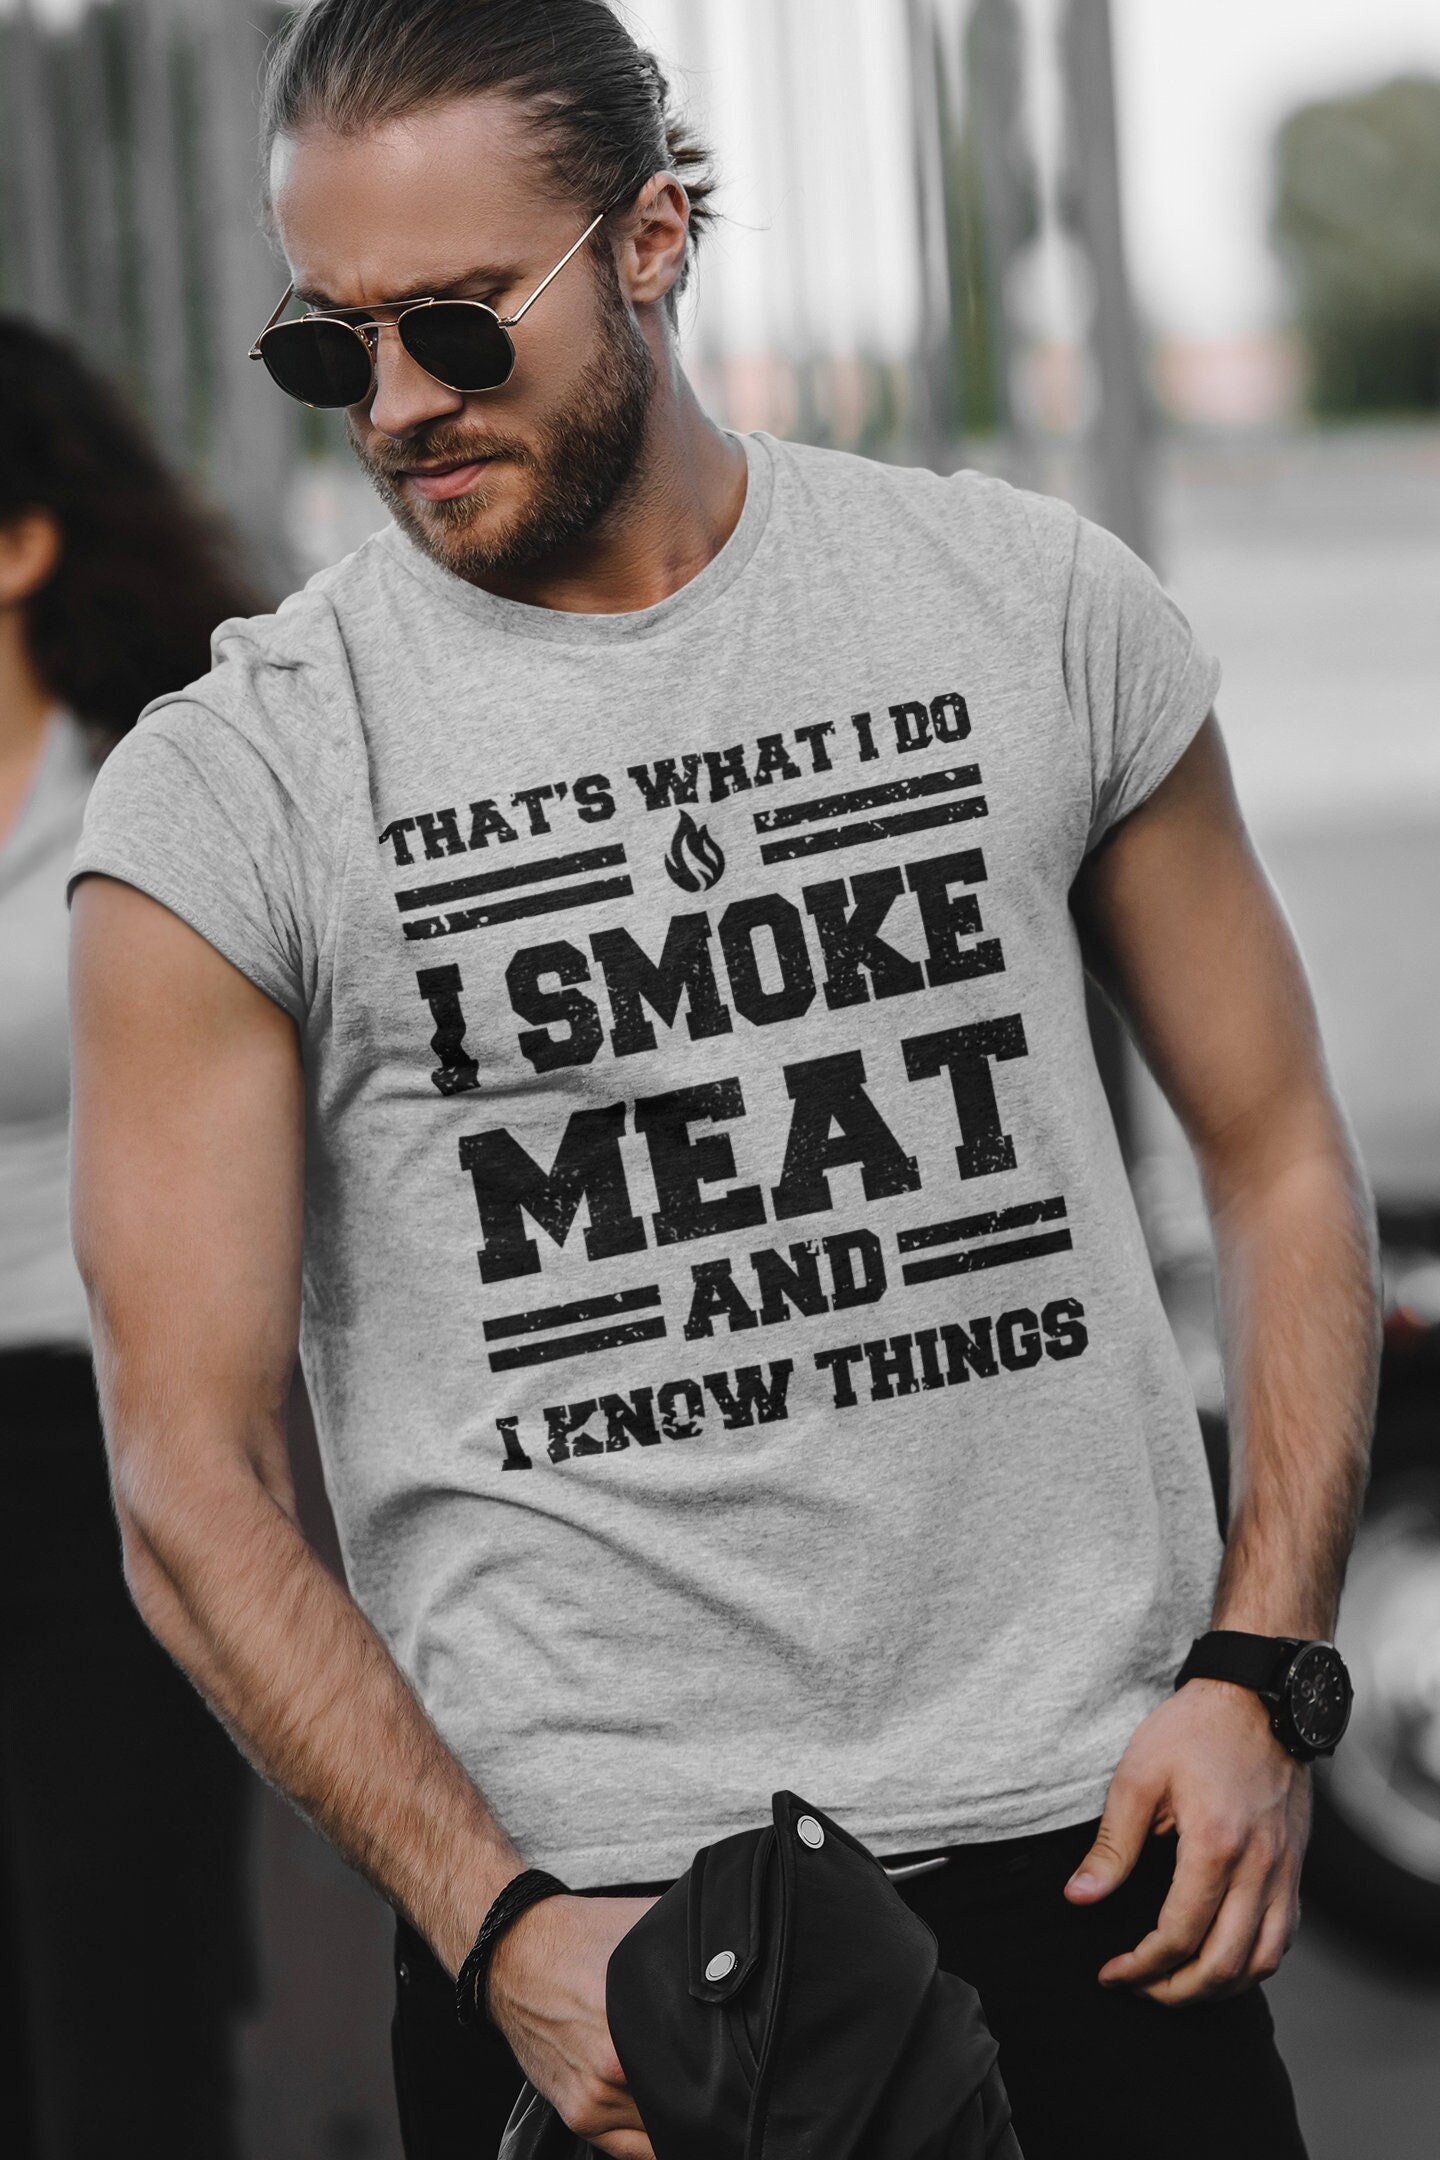 BBQ Smoker Apparel Meat Smoking Accessories Men Smokin Grill Essential  T-Shirt for Sale by DustinEMcCabe